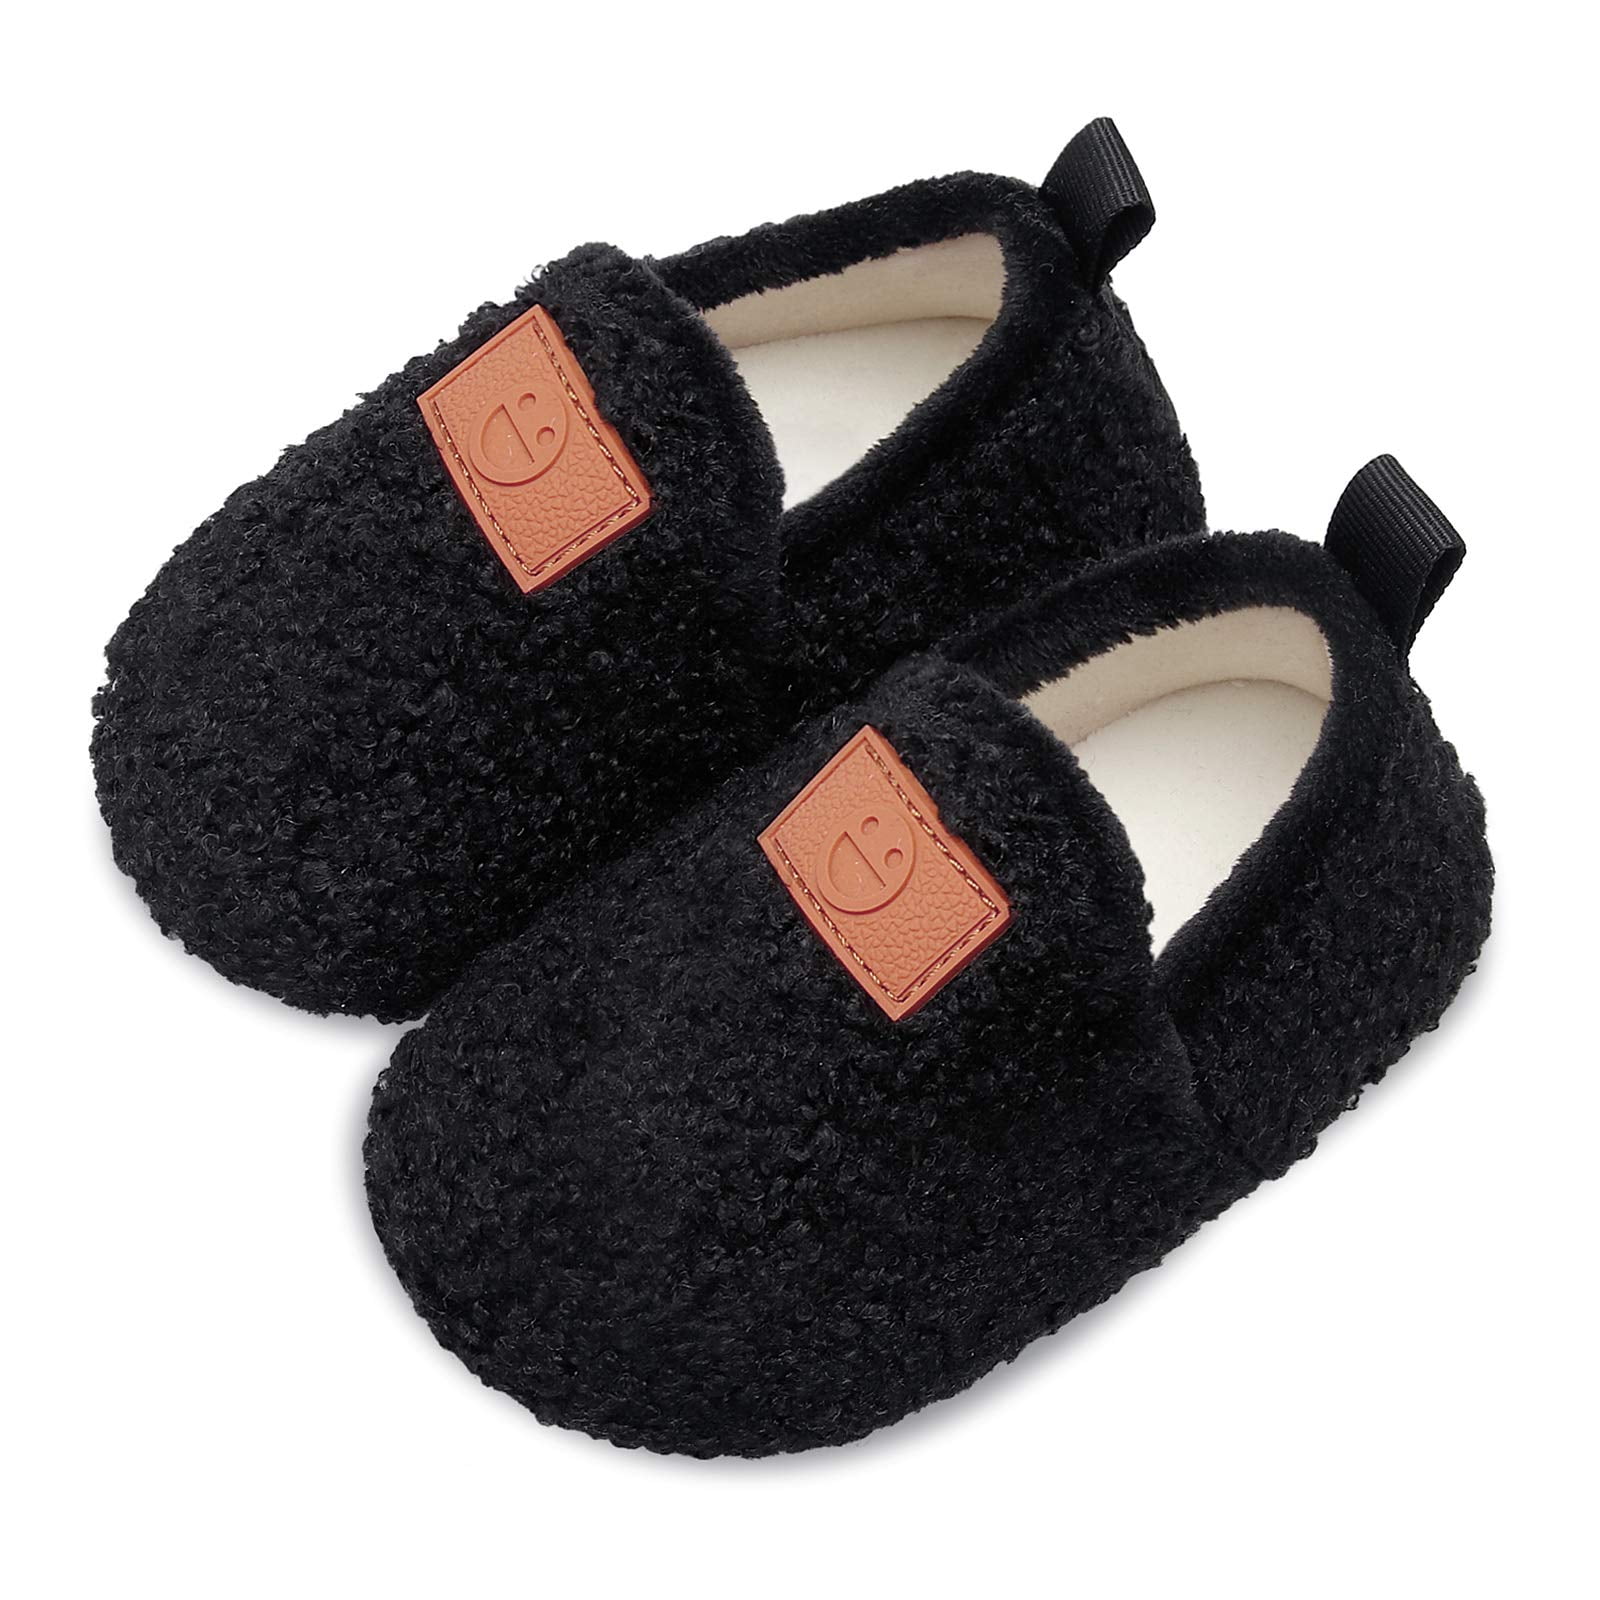  Boys Girls Fuzzy Lined Moccasin Slippers for Kids Microfleece  Lining Cozy Fuzzy Slippers Indoor Christmas Gift kids